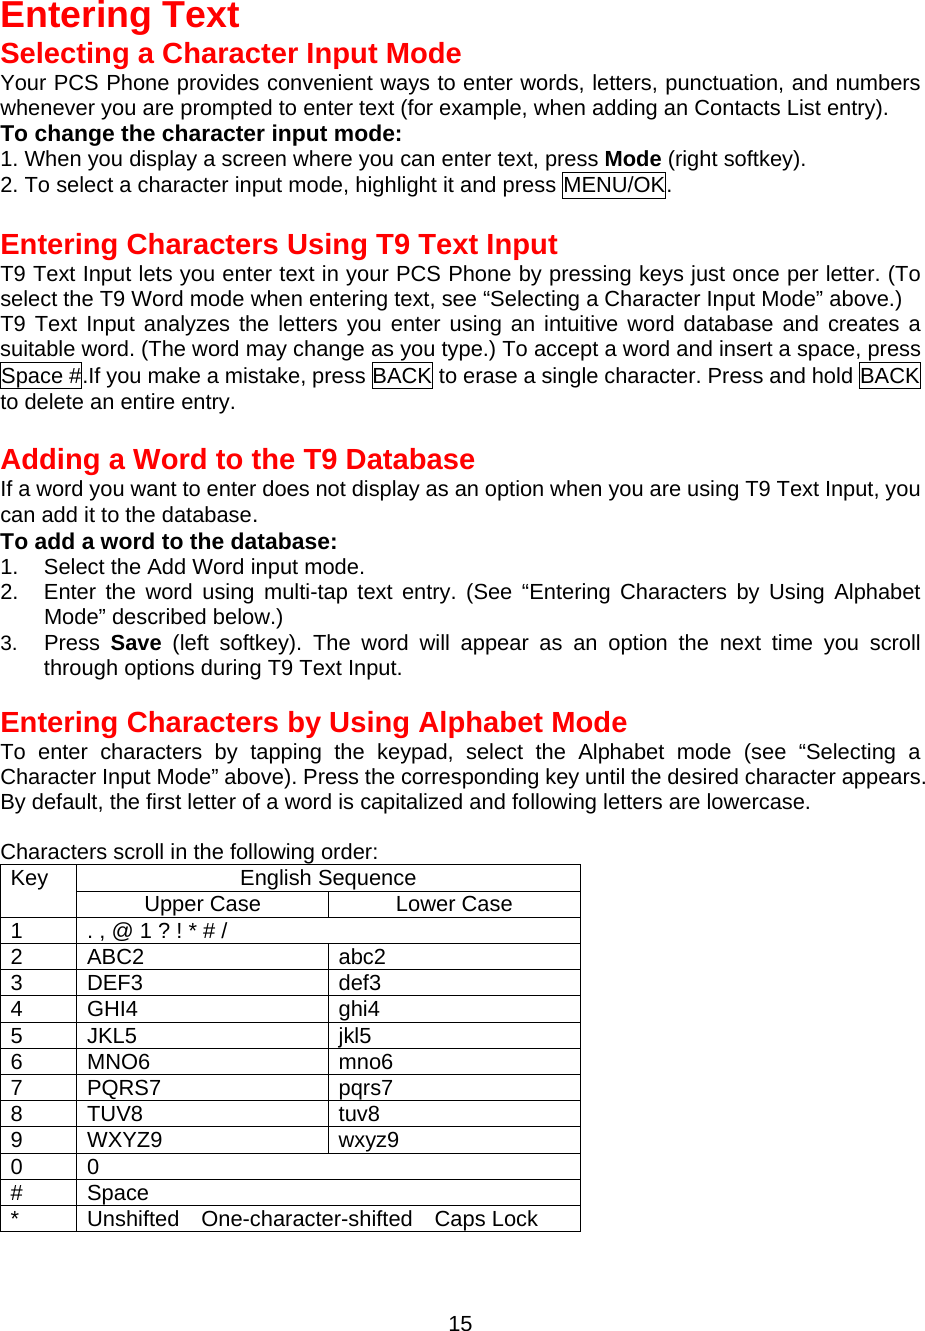   Entering Text Selecting a Character Input Mode Your PCS Phone provides convenient ways to enter words, letters, punctuation, and numbers whenever you are prompted to enter text (for example, when adding an Contacts List entry). To change the character input mode: 1. When you display a screen where you can enter text, press Mode (right softkey). 2. To select a character input mode, highlight it and press MENU/OK.  Entering Characters Using T9 Text Input T9 Text Input lets you enter text in your PCS Phone by pressing keys just once per letter. (To select the T9 Word mode when entering text, see “Selecting a Character Input Mode” above.) T9 Text Input analyzes the letters you enter using an intuitive word database and creates a suitable word. (The word may change as you type.) To accept a word and insert a space, press Space #.If you make a mistake, press BACK to erase a single character. Press and hold BACK to delete an entire entry.  Adding a Word to the T9 Database If a word you want to enter does not display as an option when you are using T9 Text Input, you can add it to the database. To add a word to the database: 1.  Select the Add Word input mode. 2.  Enter the word using multi-tap text entry. (See “Entering Characters by Using Alphabet Mode” described below.) 3.  Press  Save (left softkey). The word will appear as an option the next time you scroll through options during T9 Text Input.  Entering Characters by Using Alphabet Mode To enter characters by tapping the keypad, select the Alphabet mode (see “Selecting a Character Input Mode” above). Press the corresponding key until the desired character appears. By default, the first letter of a word is capitalized and following letters are lowercase.  Characters scroll in the following order: English Sequence Key  Upper Case  Lower Case 1  . , @ 1 ? ! * # / 2 ABC2  abc2 3 DEF3  def3 4 GHI4  ghi4 5 JKL5  jkl5 6 MNO6  mno6 7 PQRS7  pqrs7 8 TUV8  tuv8 9 WXYZ9  wxyz9 0 0 # Space *  Unshifted  One-character-shifted  Caps Lock  15